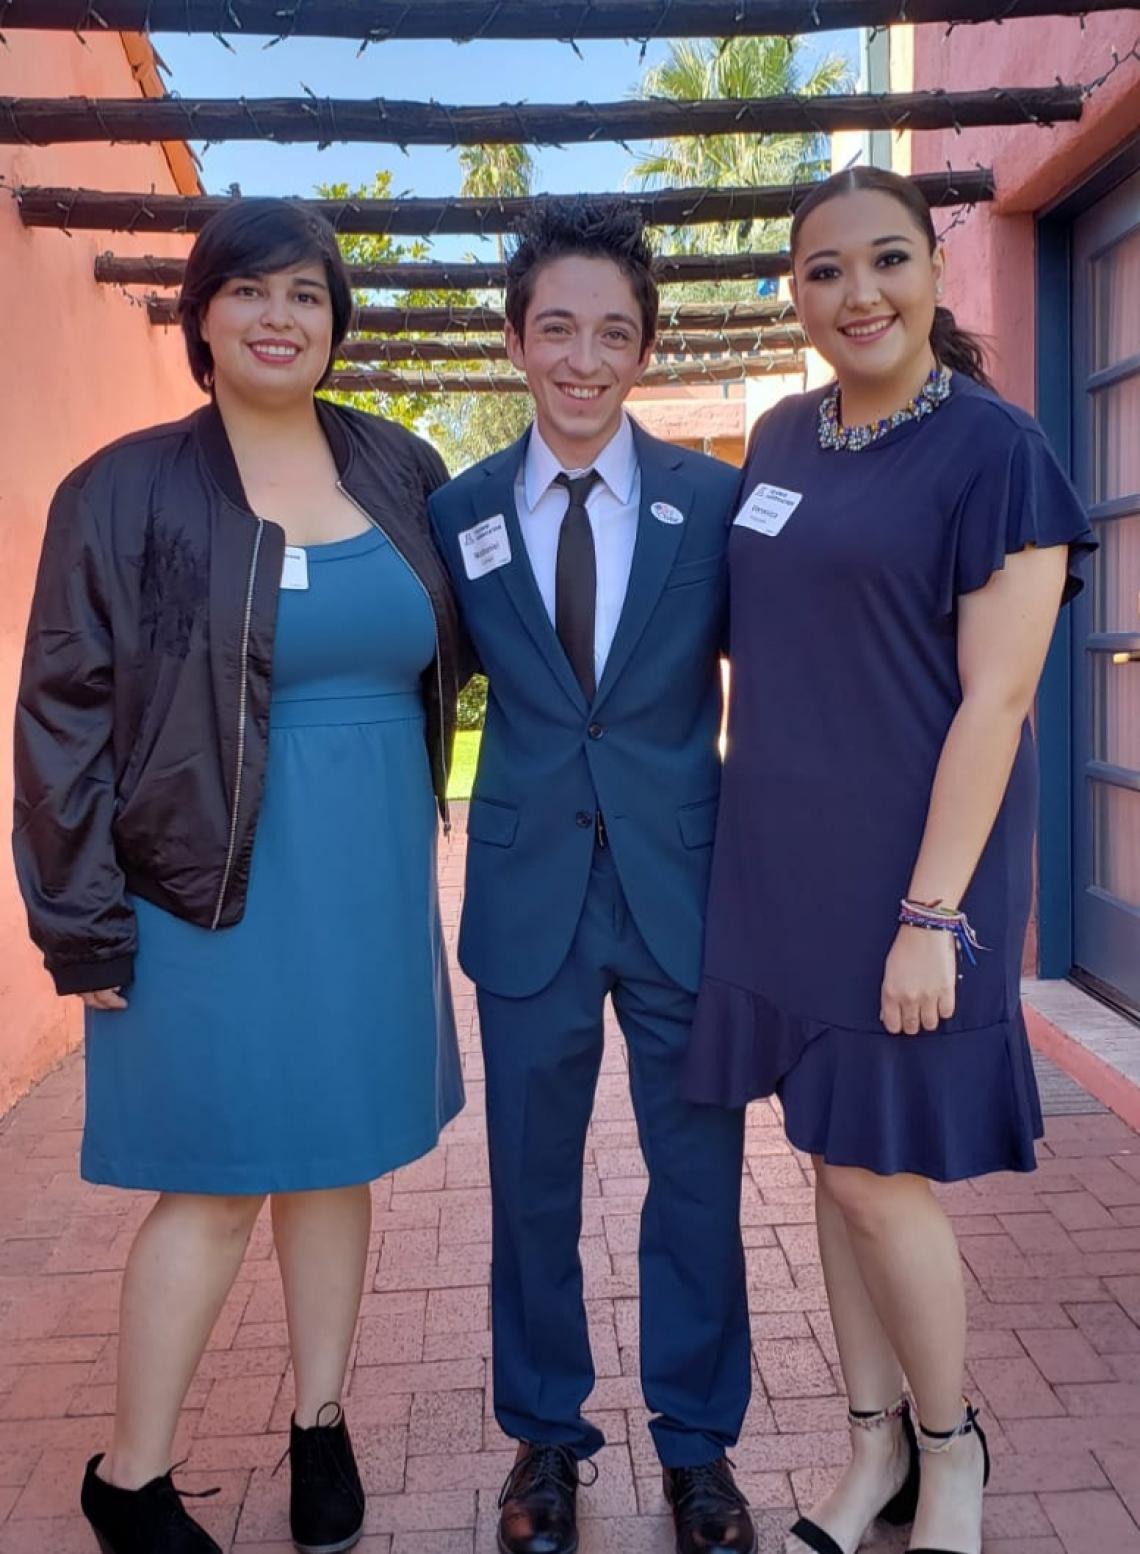 Three students pose for a photo, Nathan, is centered and flanked by two female students, all are smiling and facing the camera